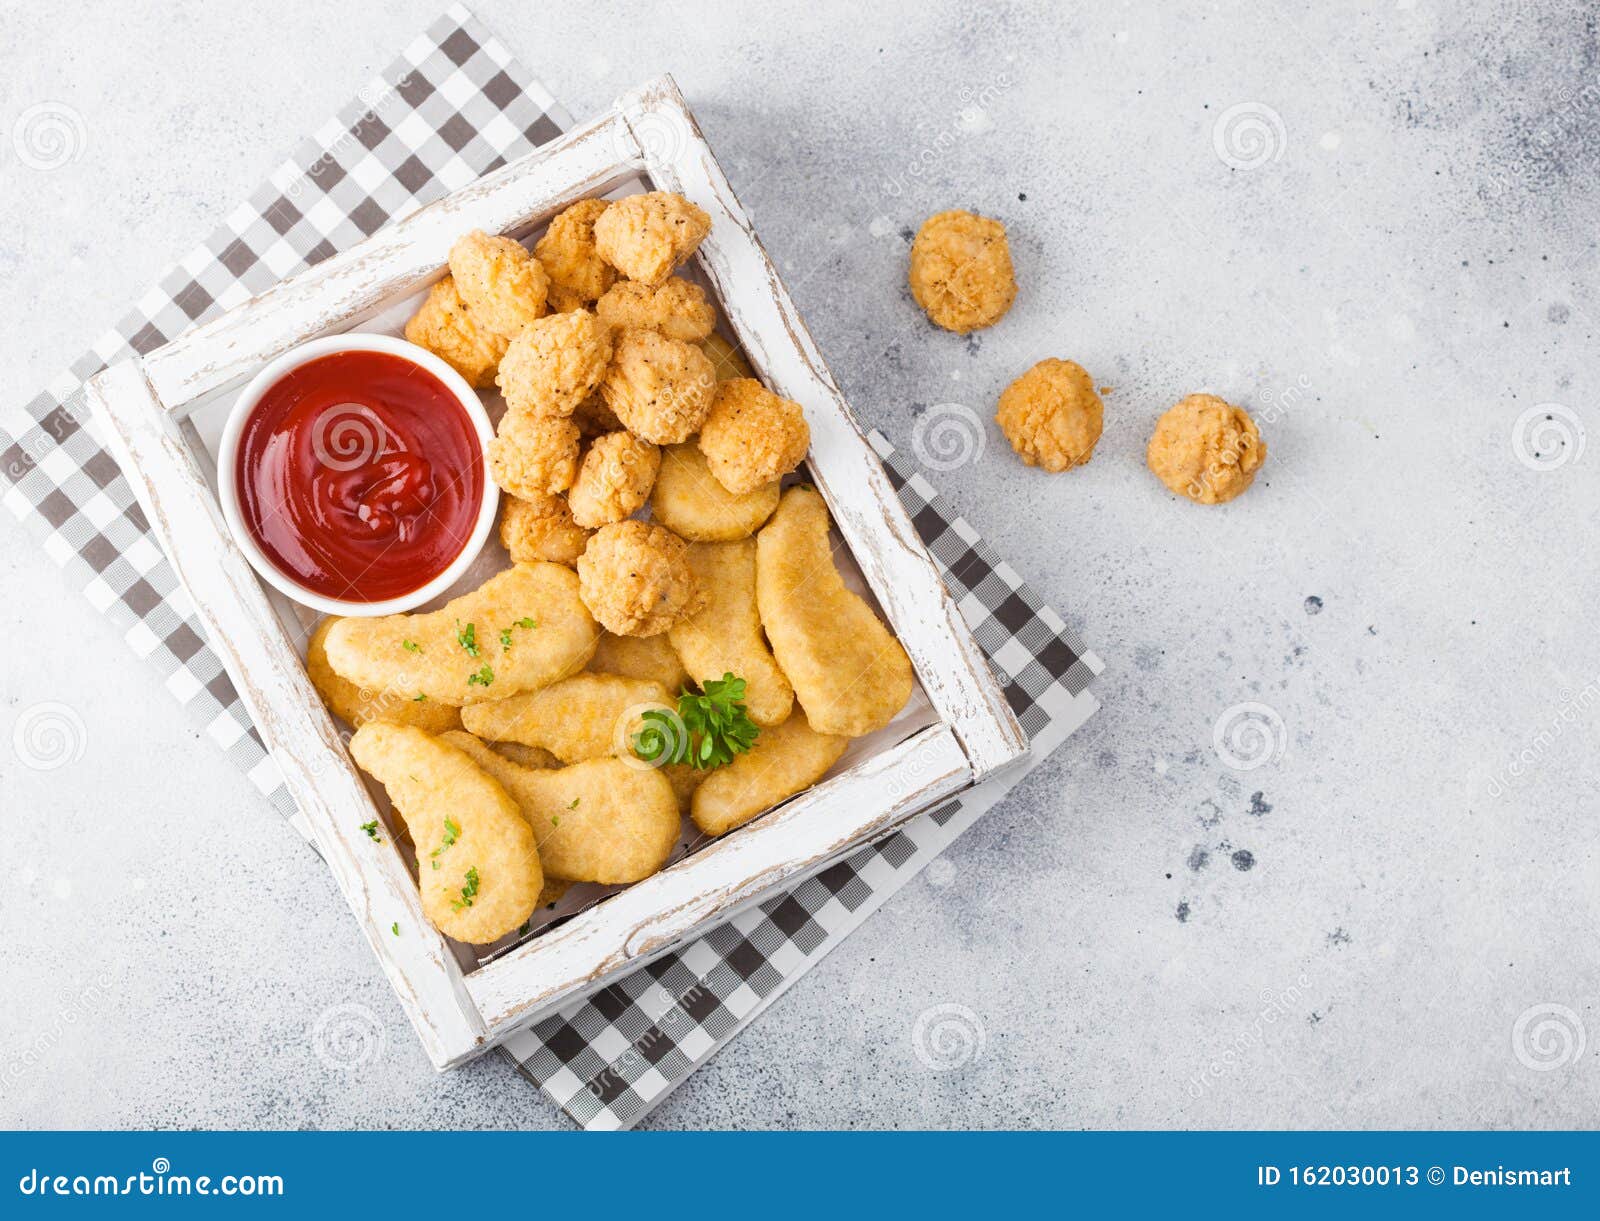 Buttered Chicken Nuggets and Popcorn Bites in White Vintage Wooden Box with  Ketchup on Light Background. Top View Stock Image - Image of gold, breast:  162030013